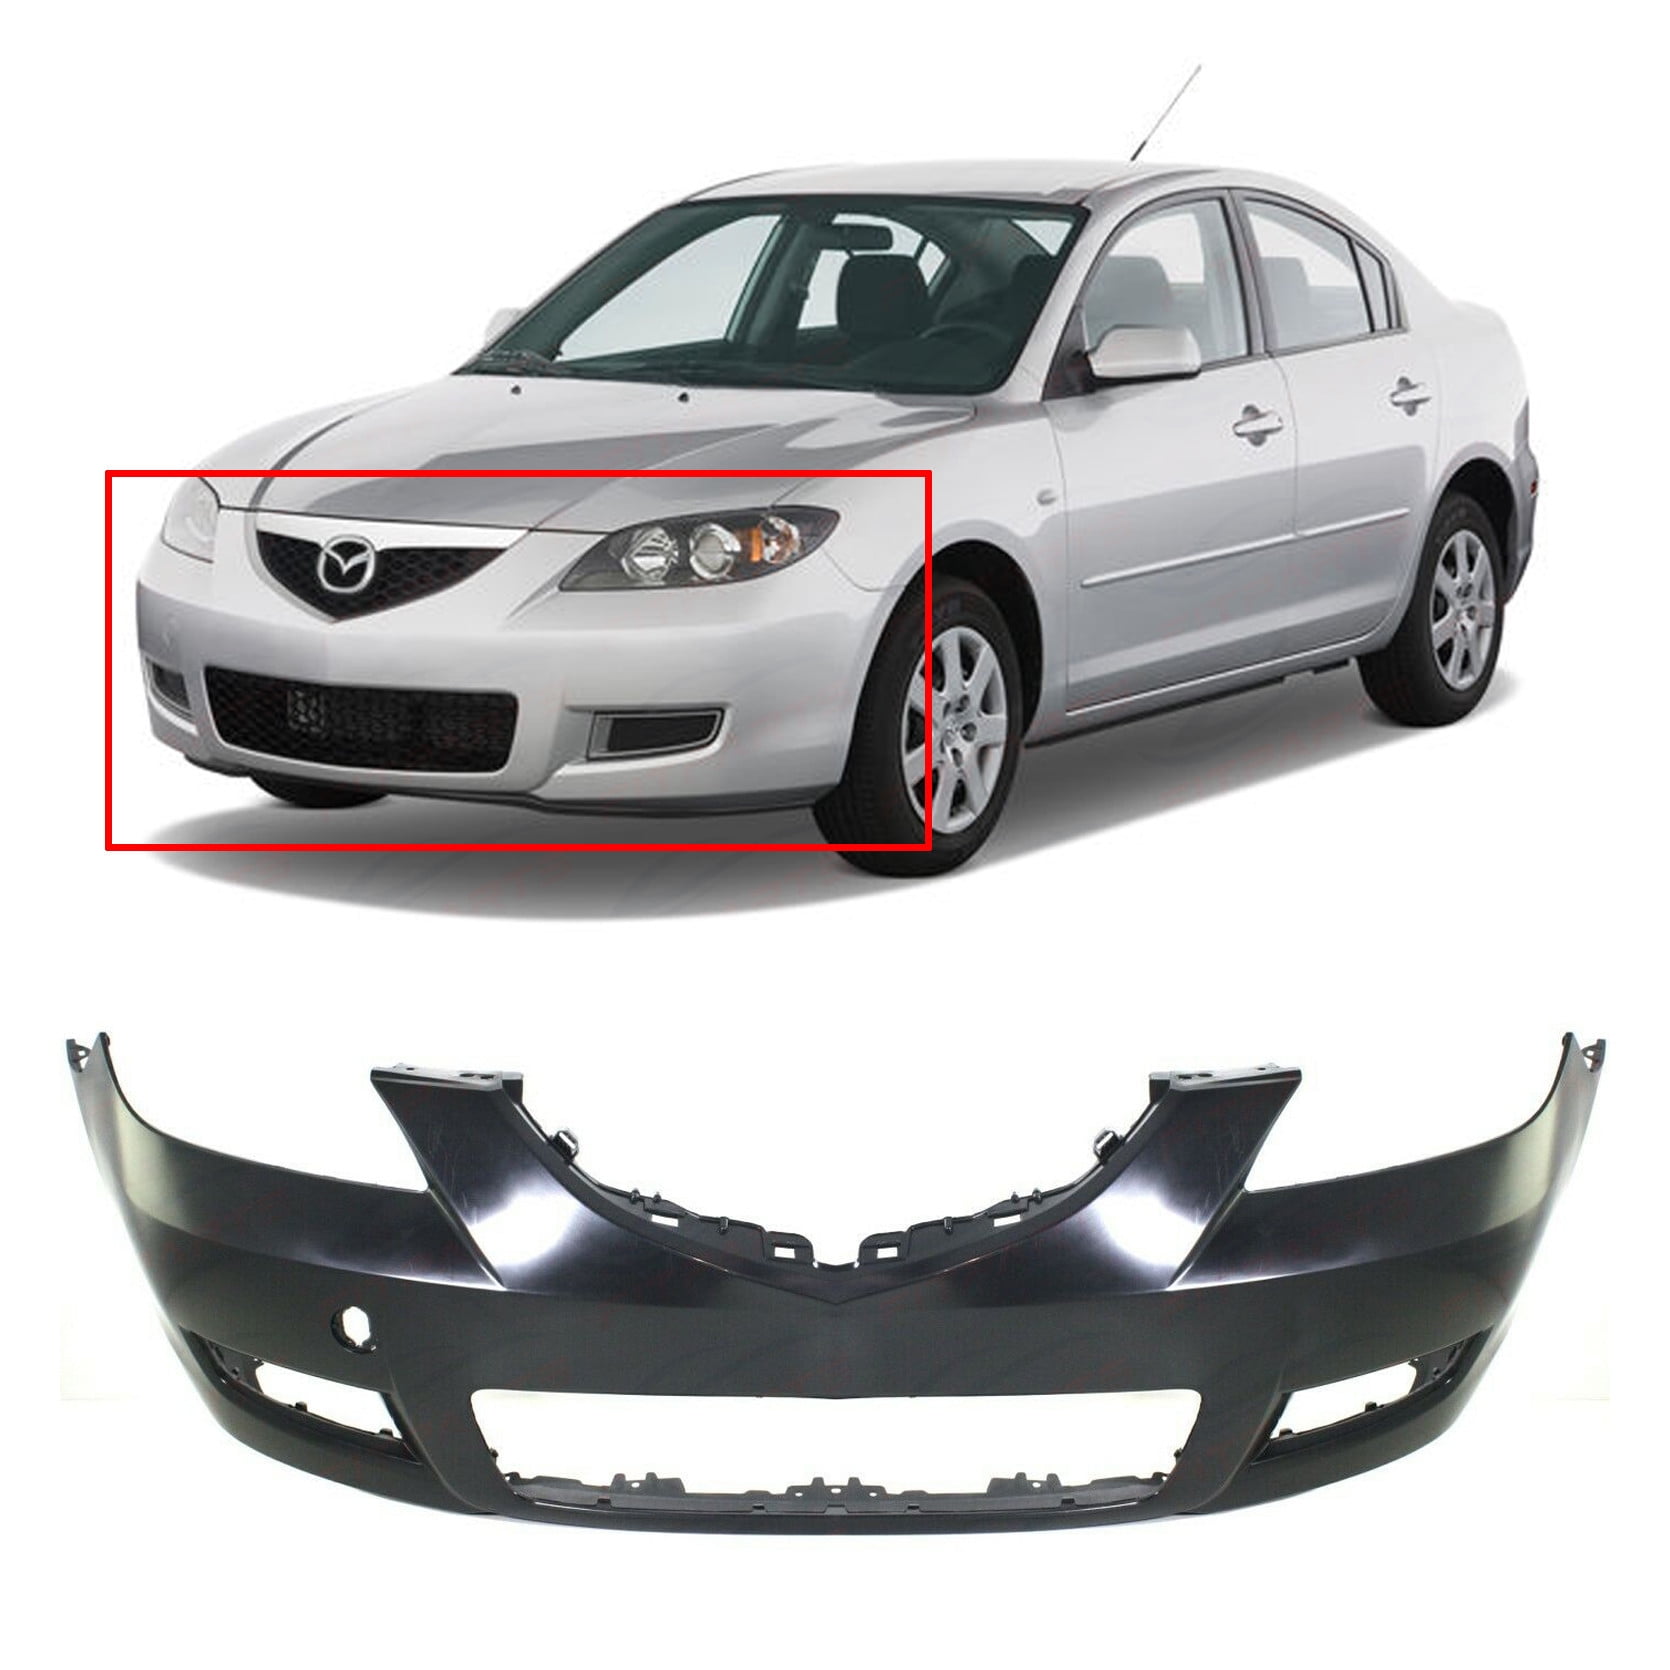 09-10 ACURA TSX FRONT UPPER+LOWER STAINLESS STEEL MESH GRILLE GRILL COMBO CHROME